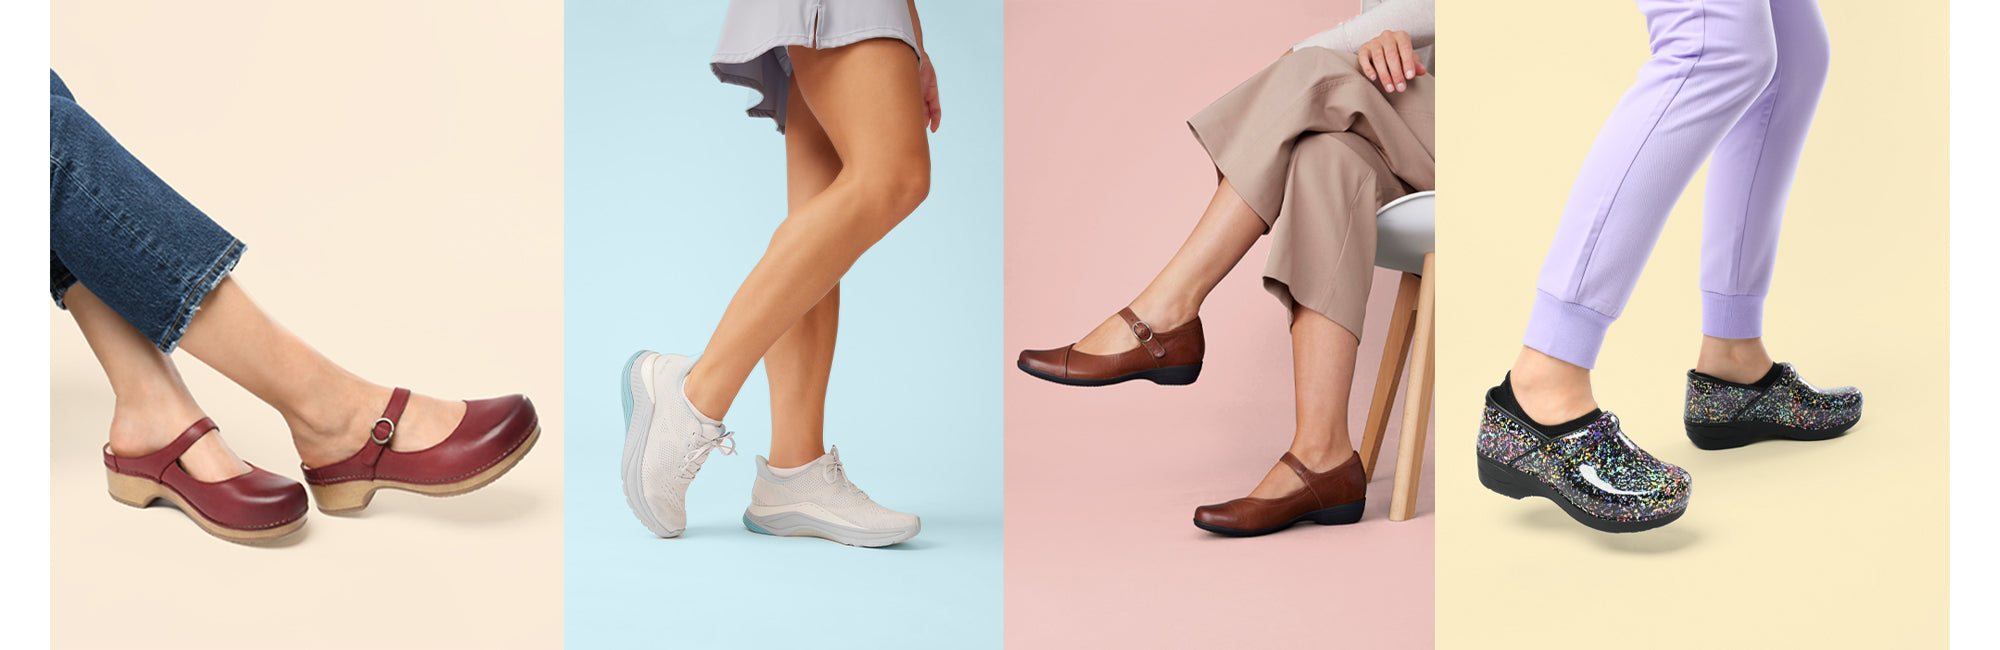 Four types of footwear styles on sale are shown. A red leather mule, a white active sneaker, brown leather Mary Janes, and a printed patent clog.